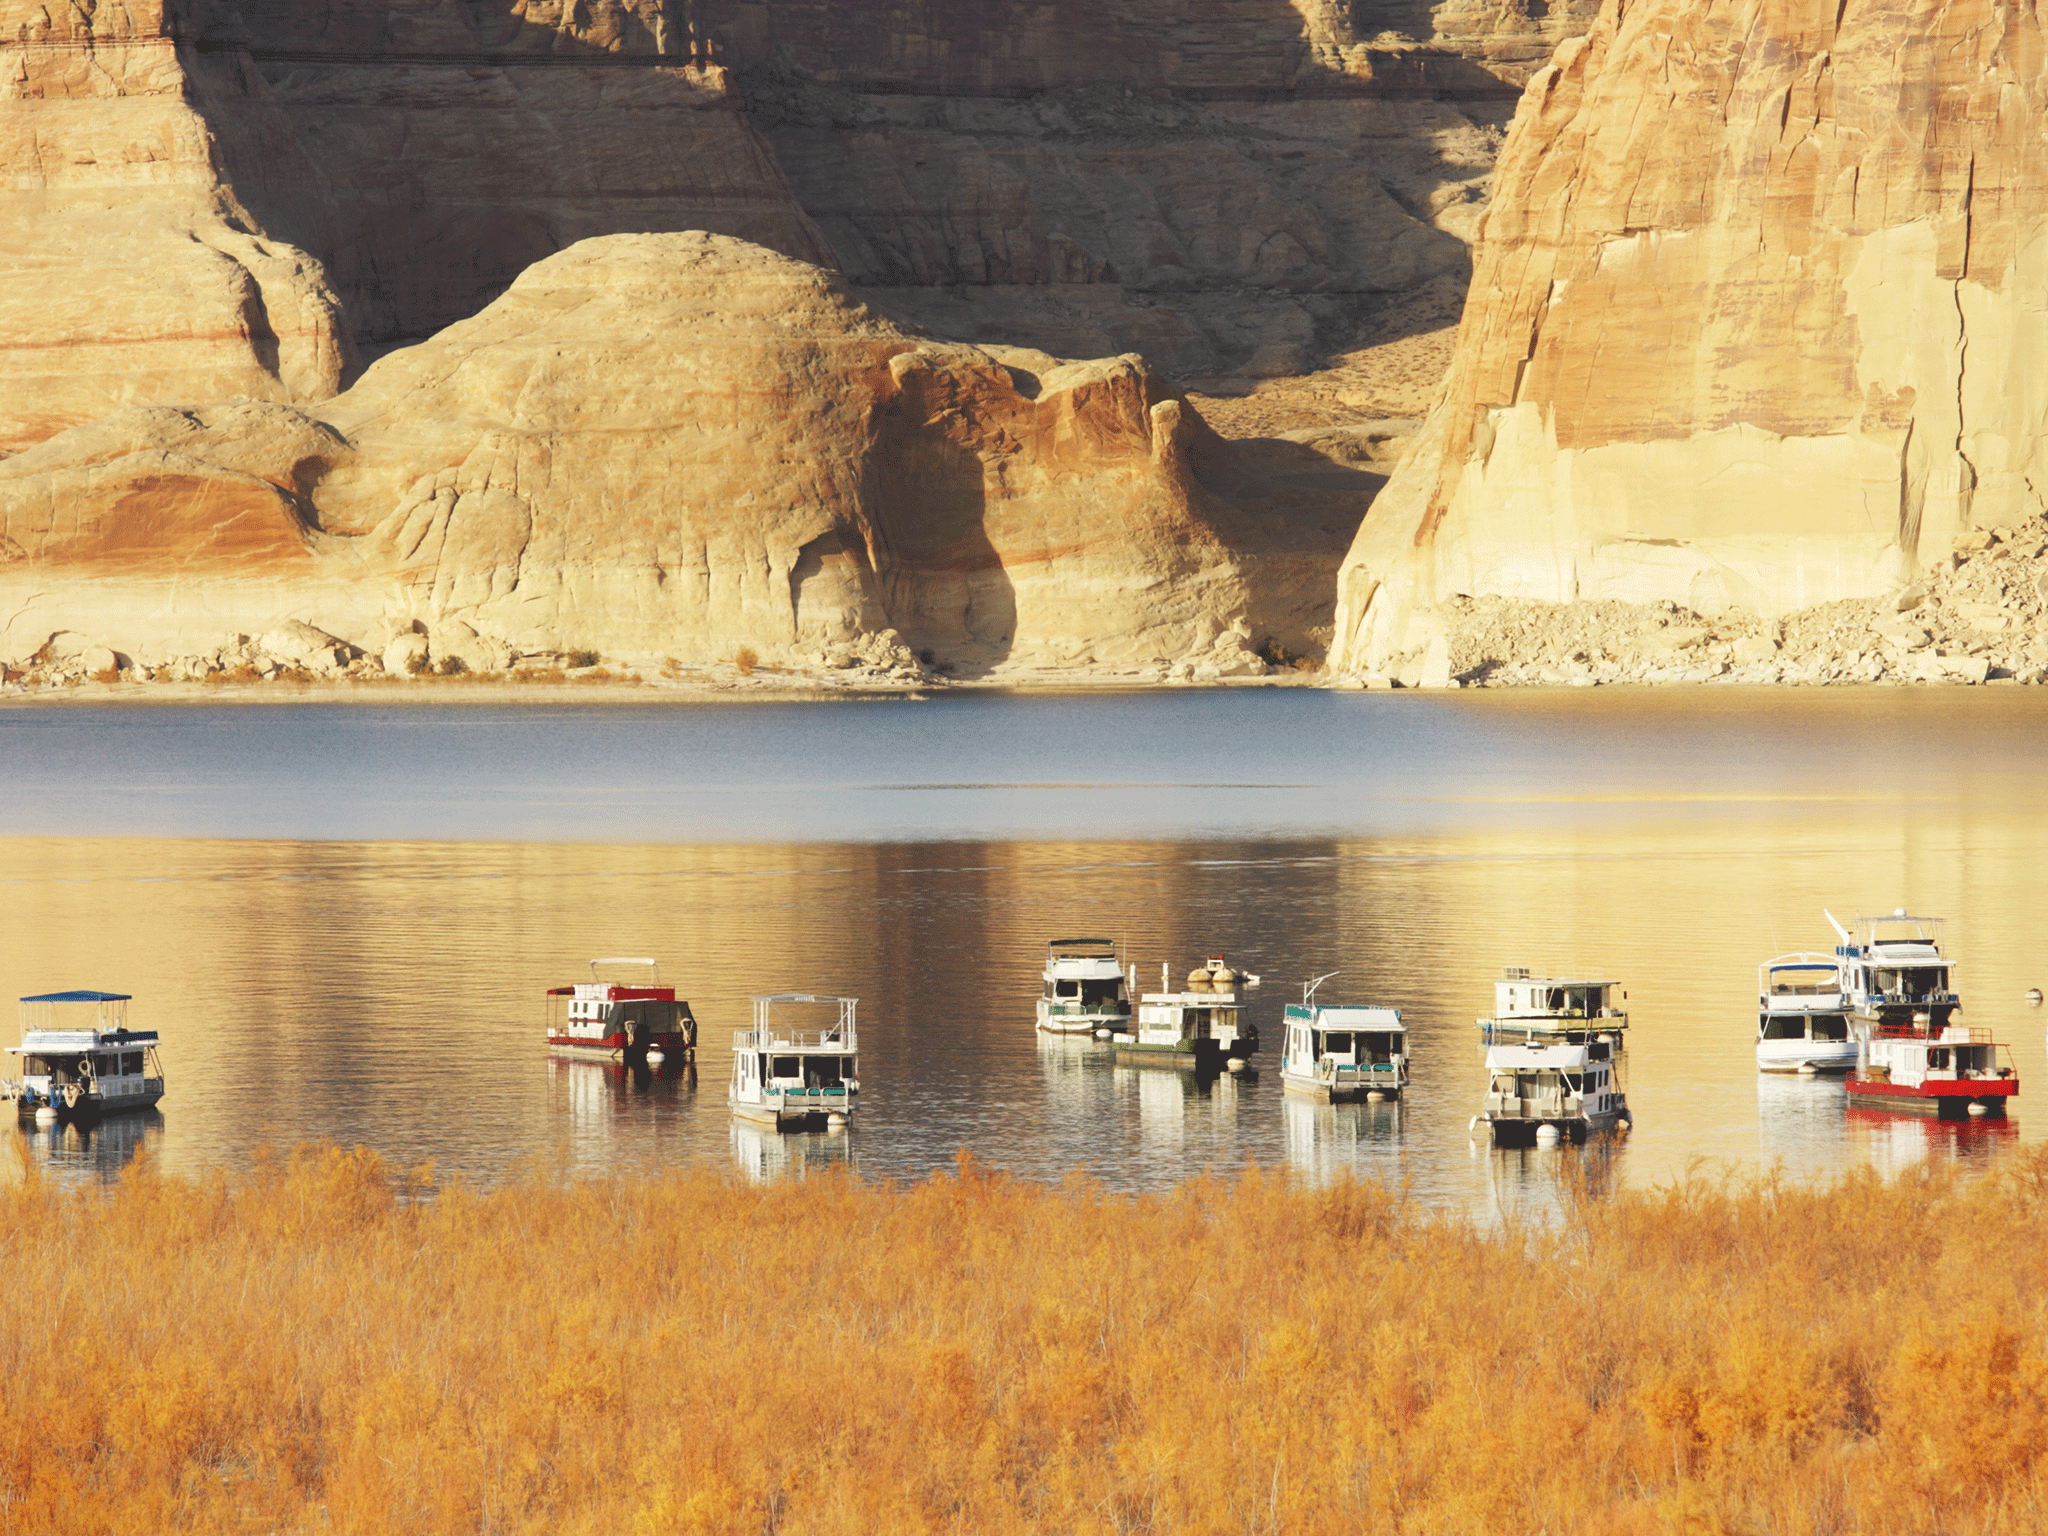 Houseboats anchored at Lake Powell, a reservoir on the border of Utah and Arizona. Neither the mother nor her child had a lifejacket.